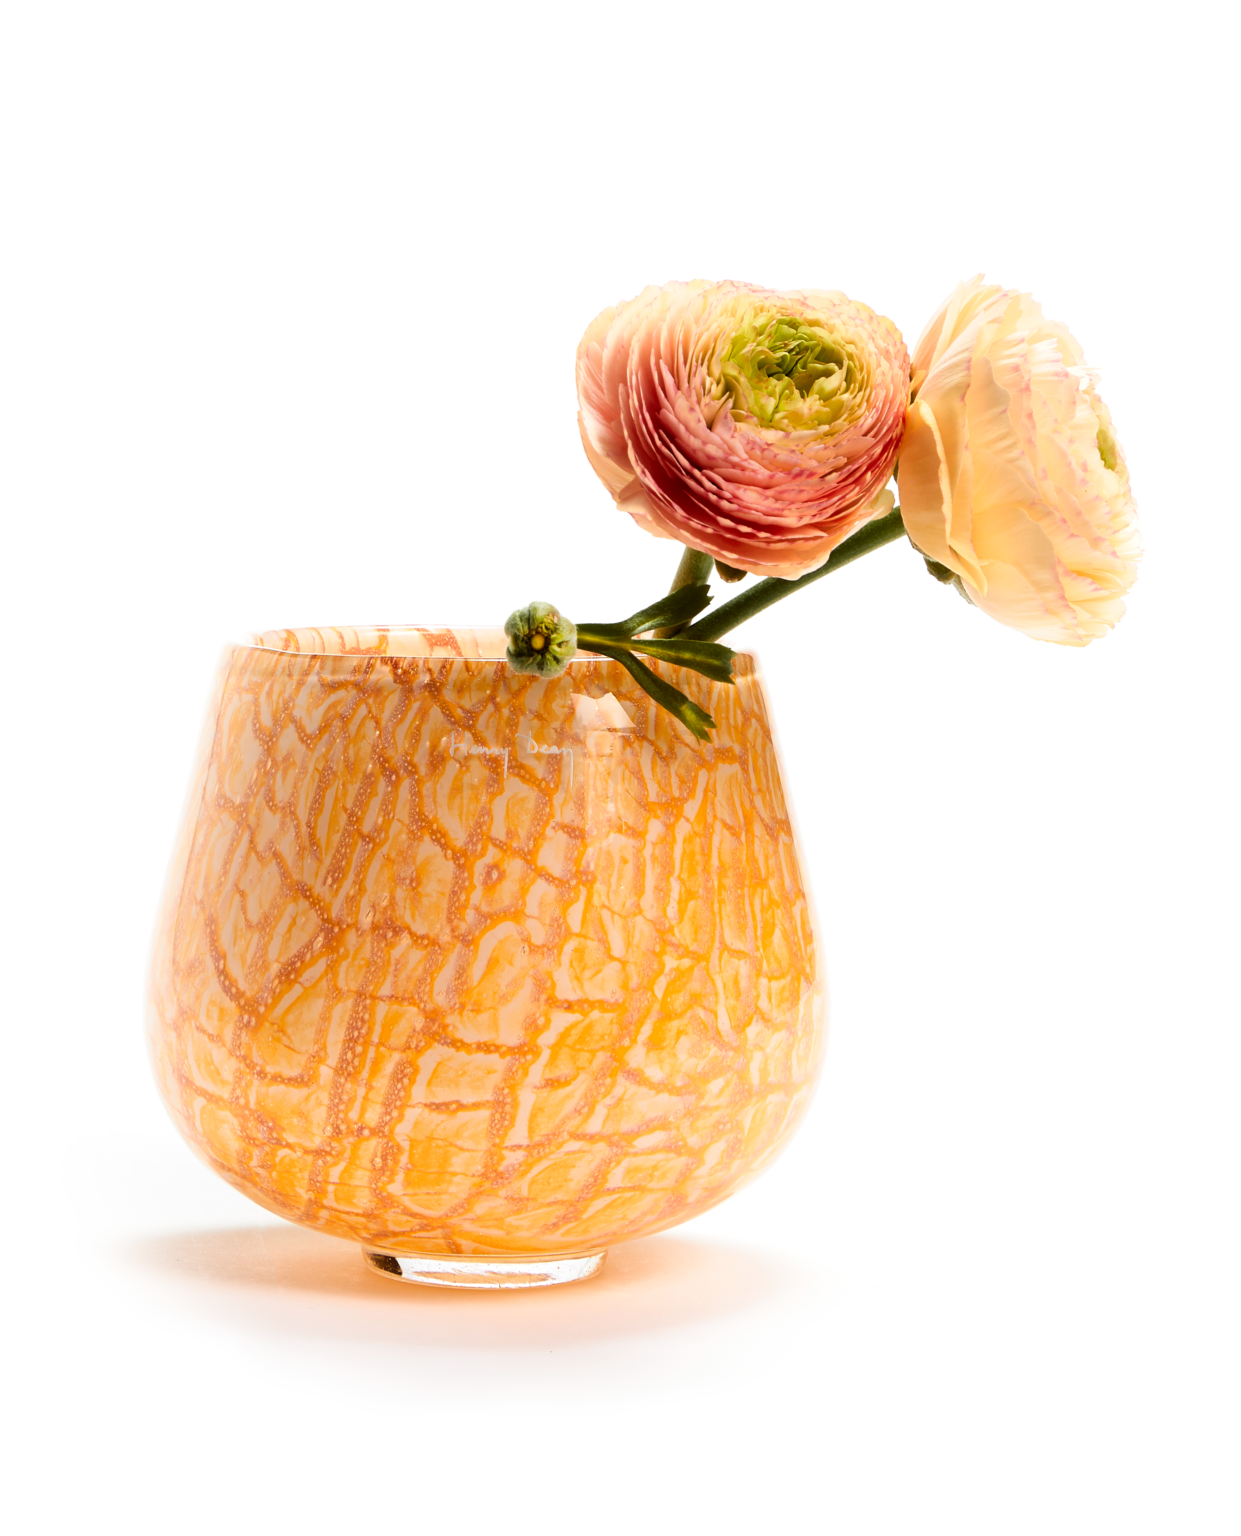 Handmade glass vase in a opaque tangerine color with marbling details and two orange flowers